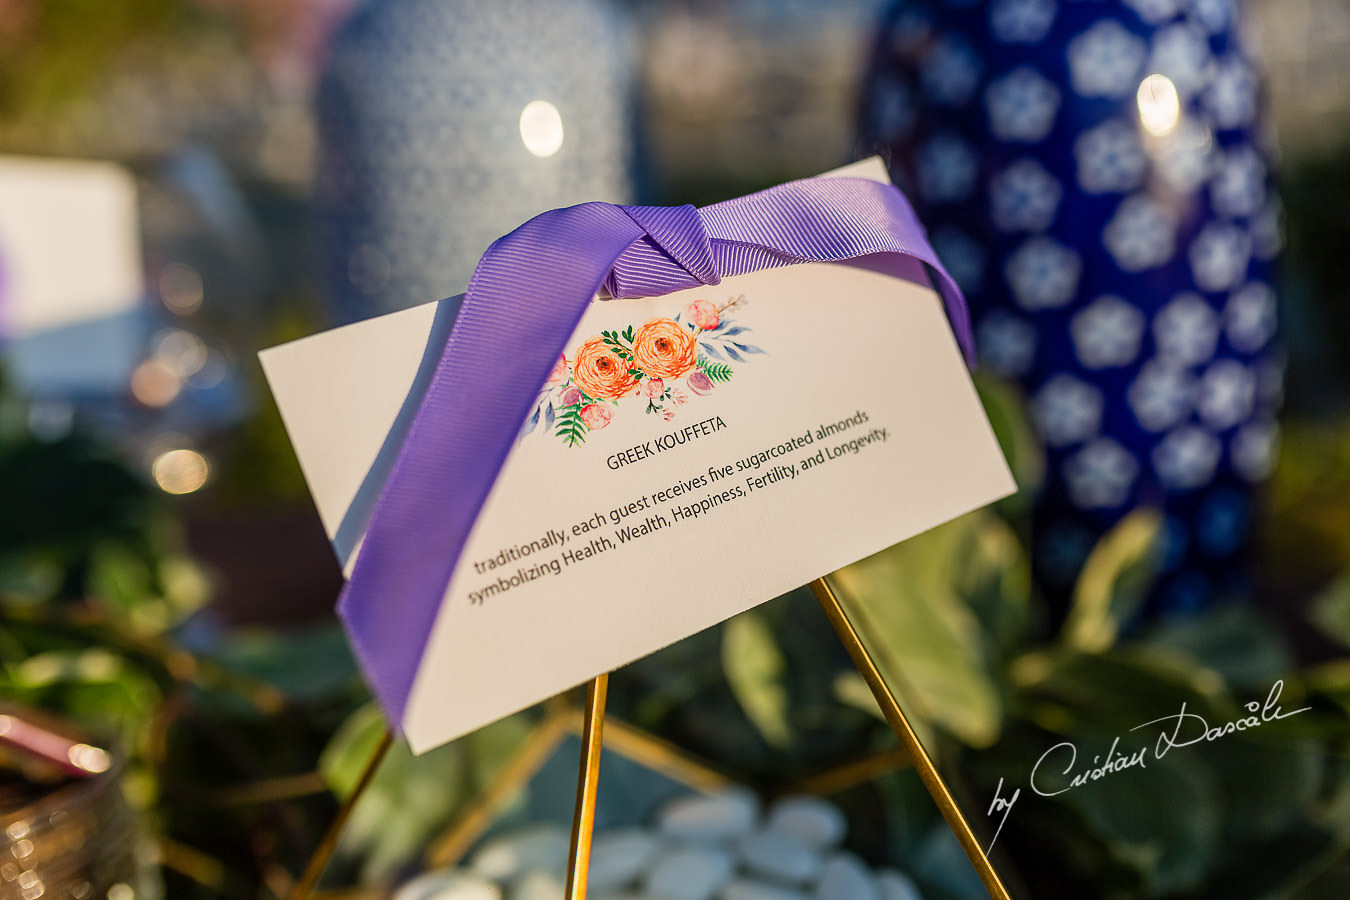 Beautiful Wedding details photographed by Cristian Dascalu during a wedding ceremony at St Raphael Hotel in Limassol, Cyprus.